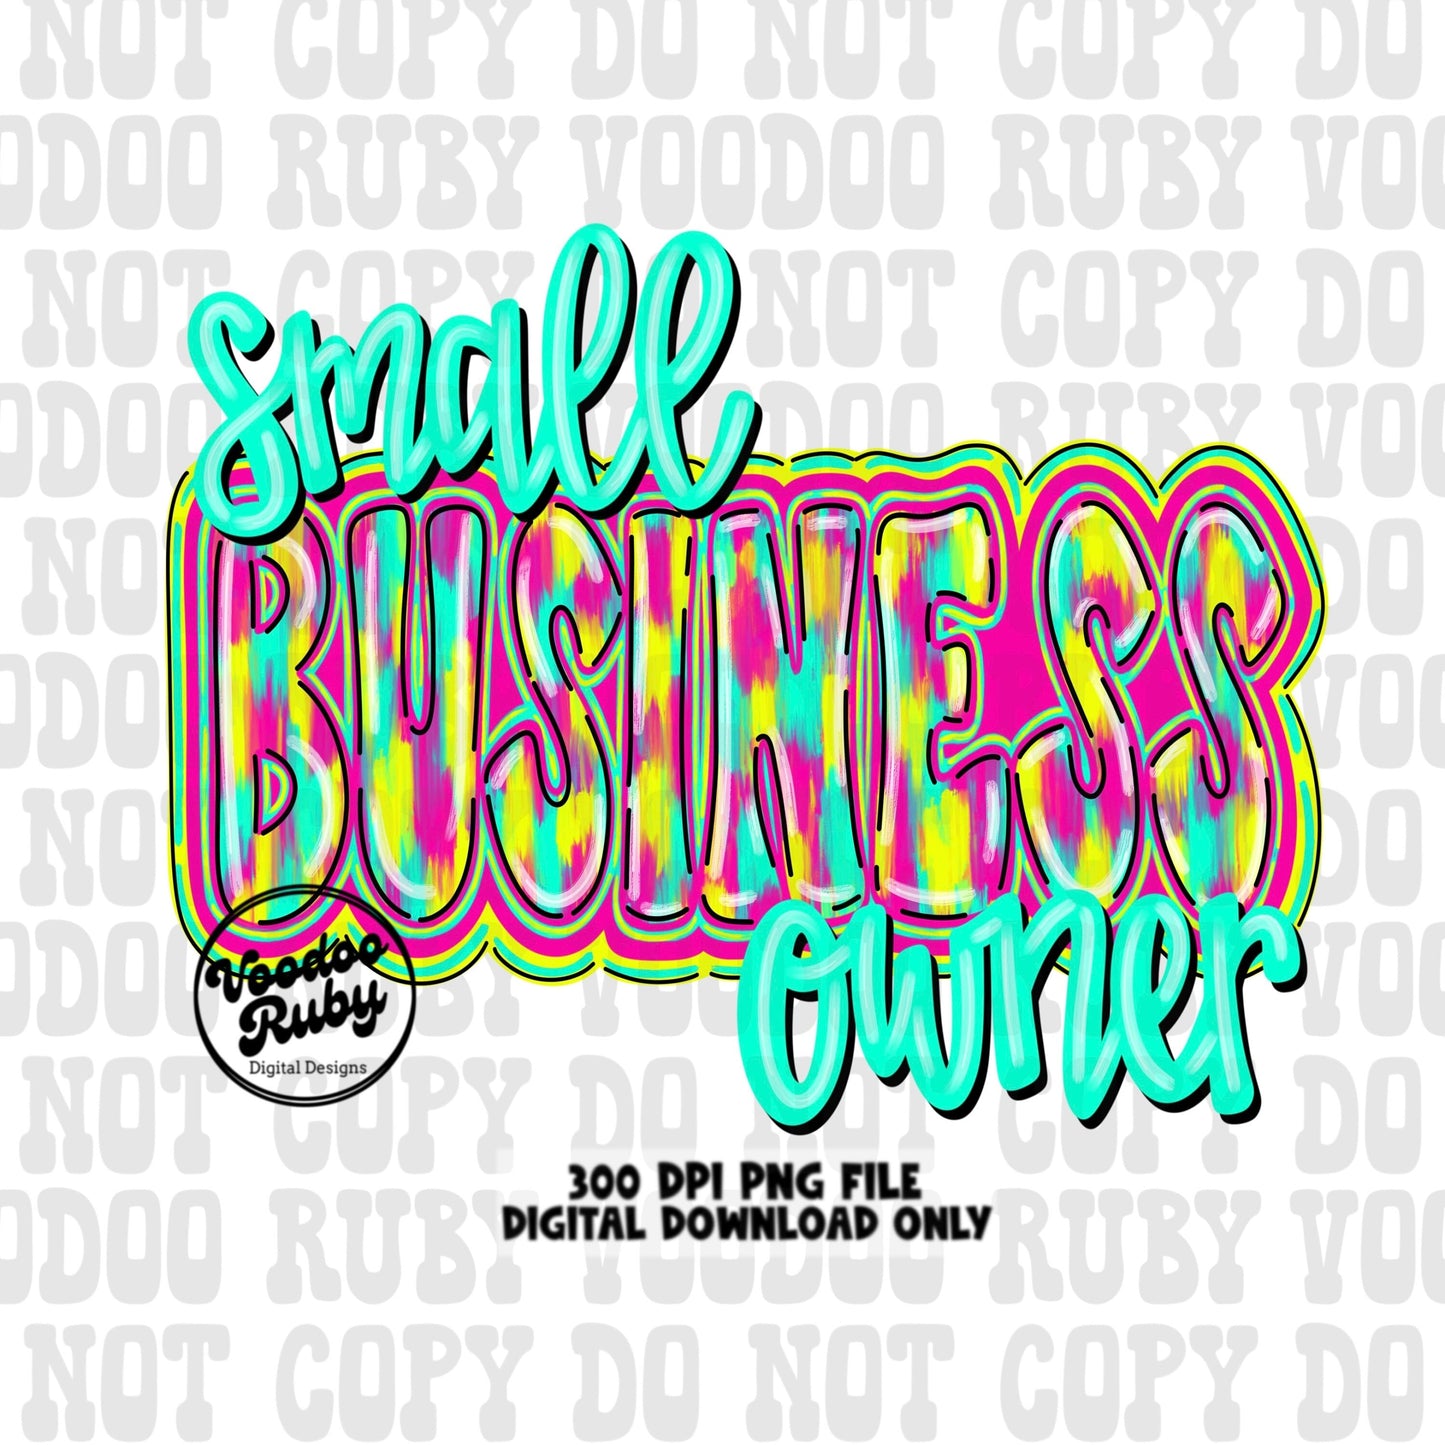 Small Business Owner PNG Design Sublimation Hand Drawn Digital Download Hustle PNG Boss png small business dtf Printable